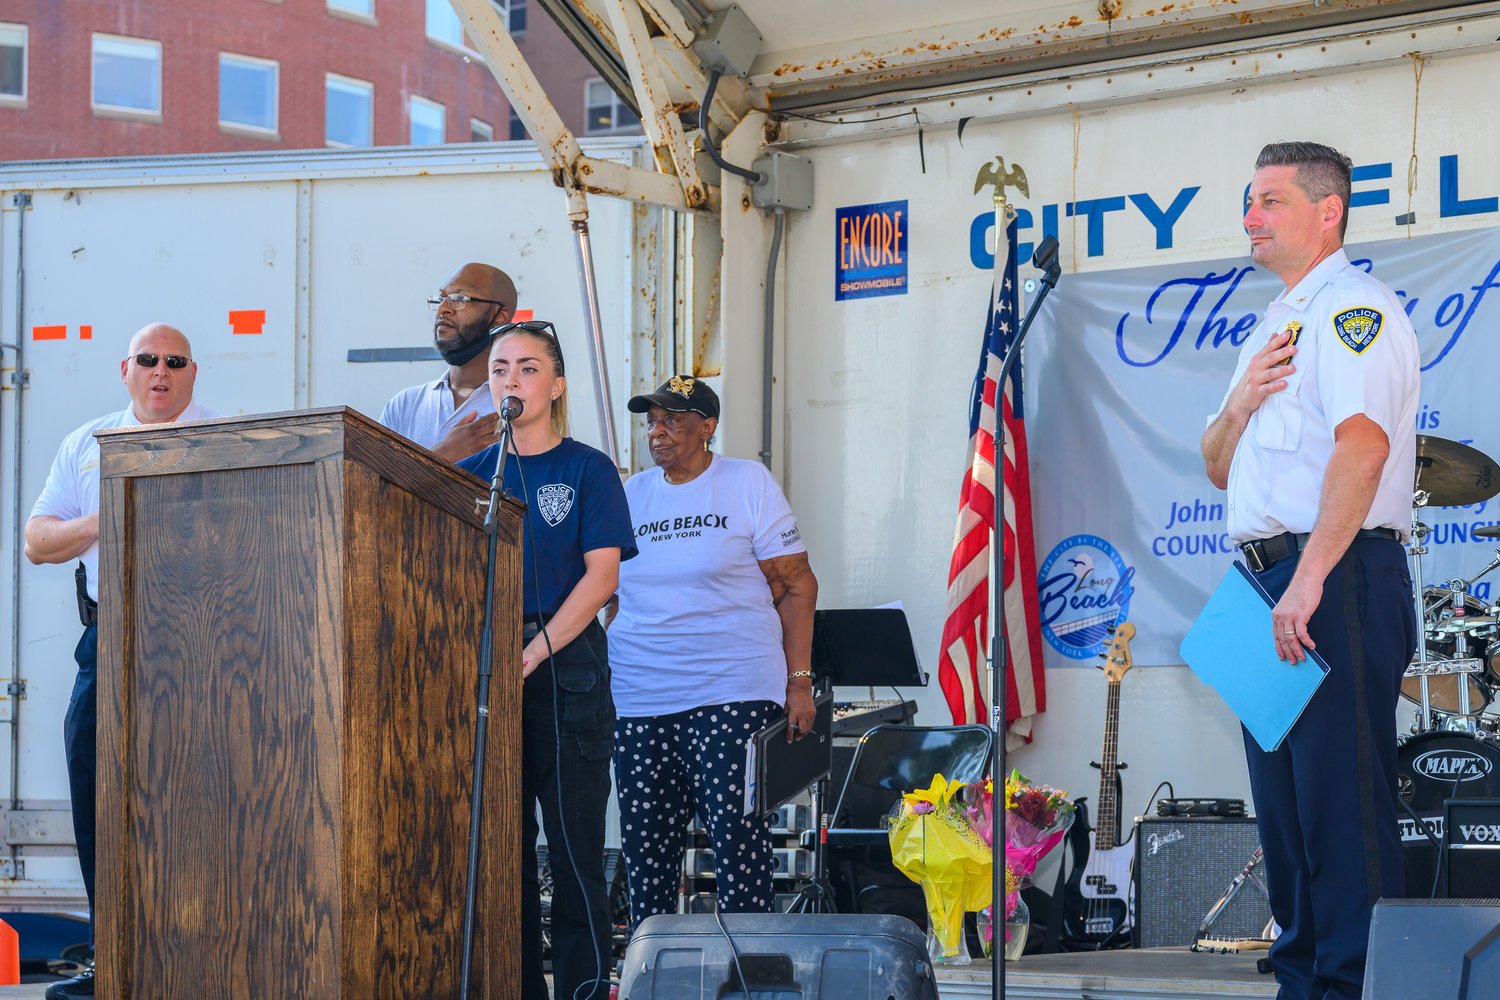 Long Beach Special Officer Kristen Murphy sang the national anthem at the city’s National Night Out last week.